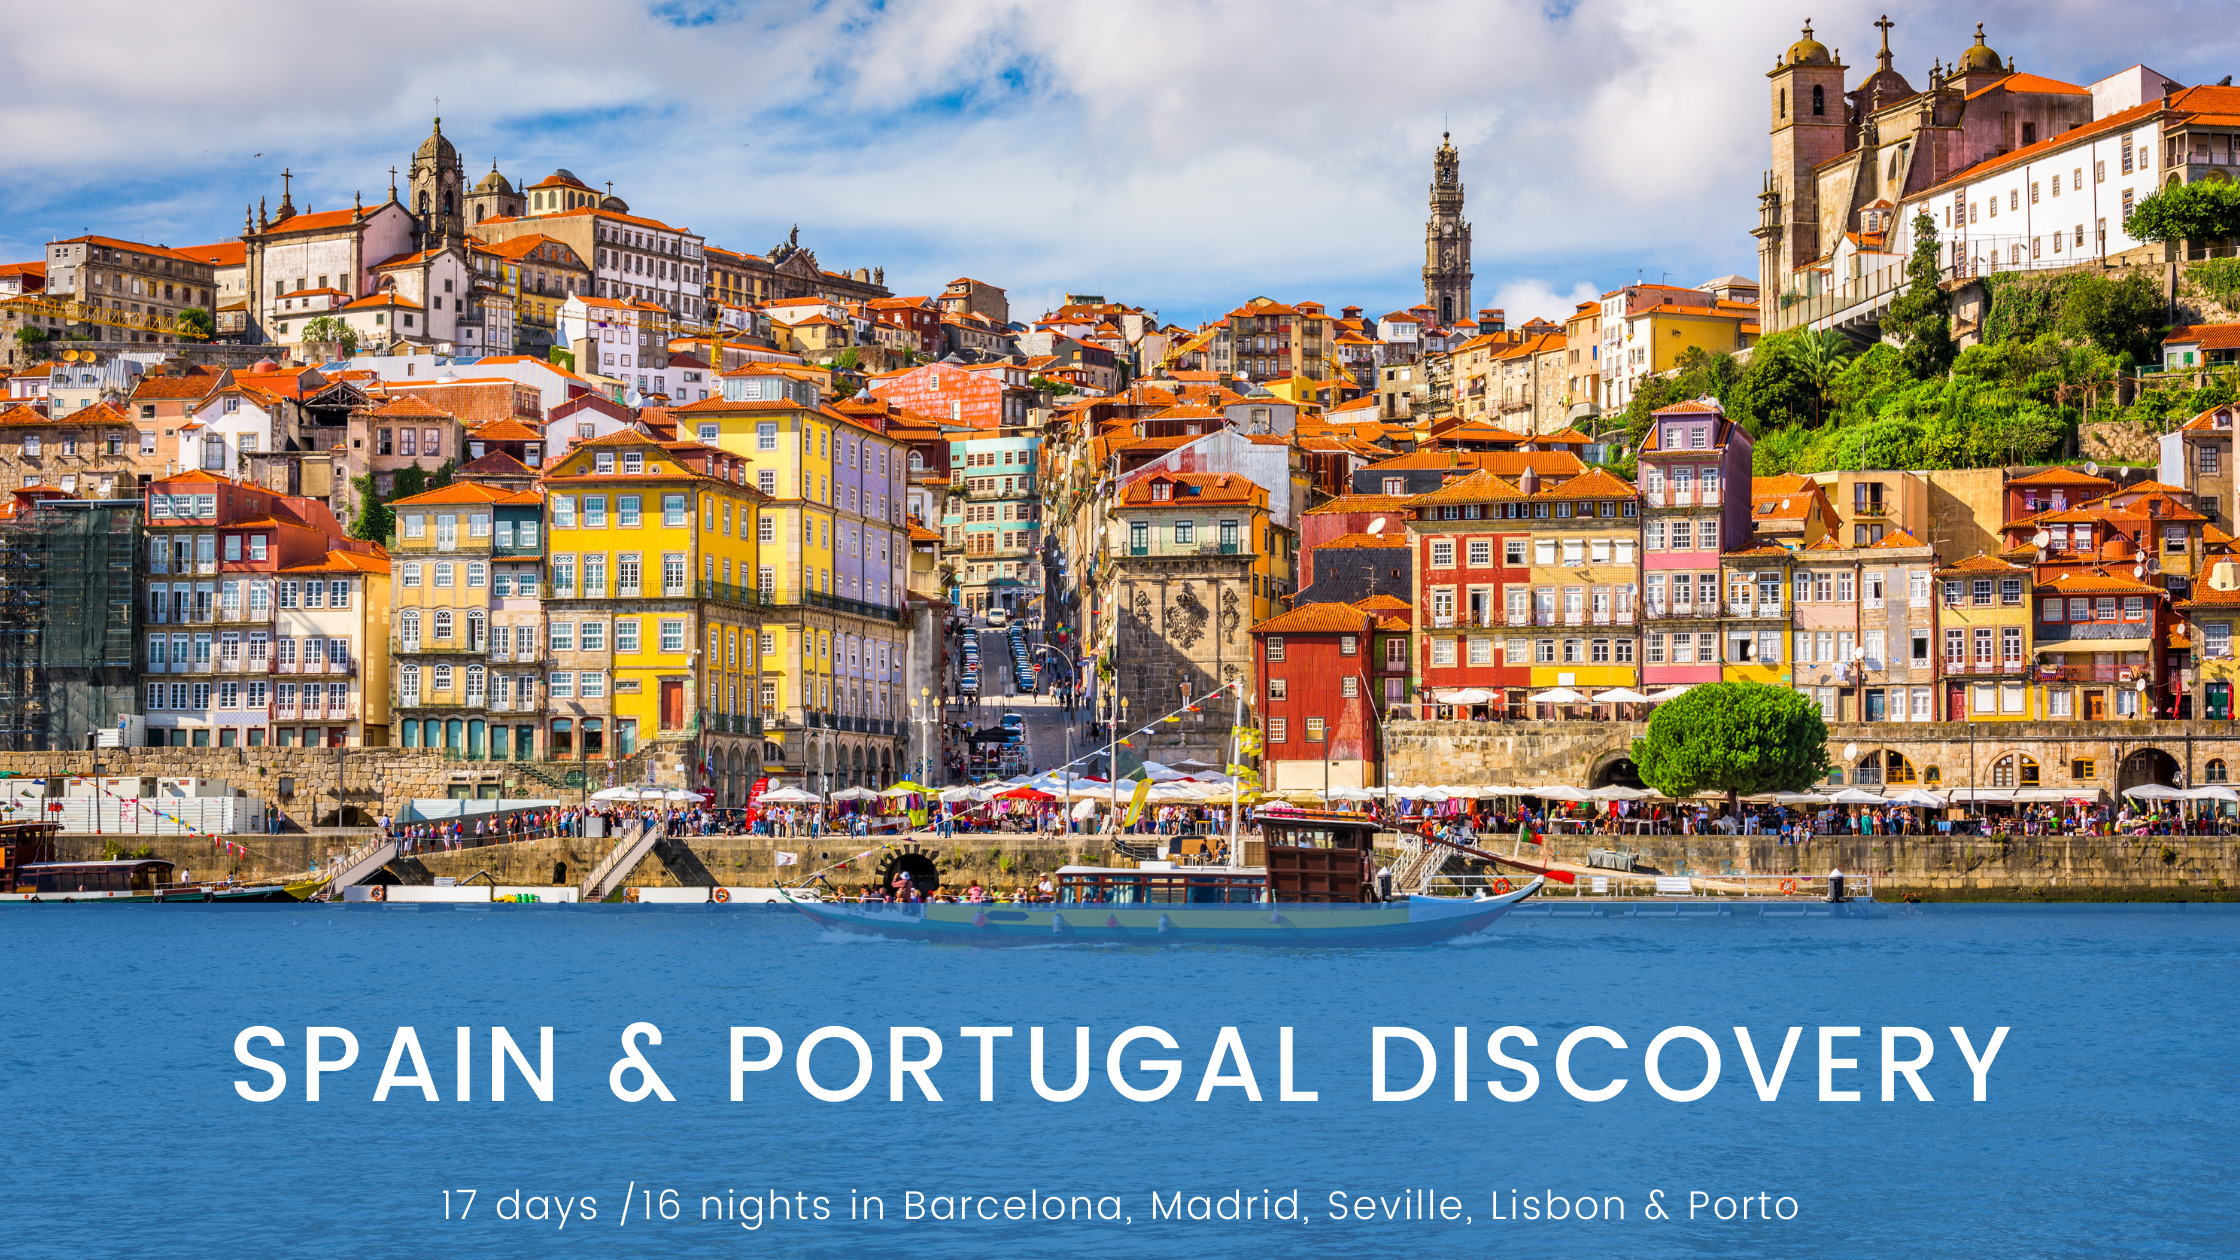 Spain & Portugal Discovery